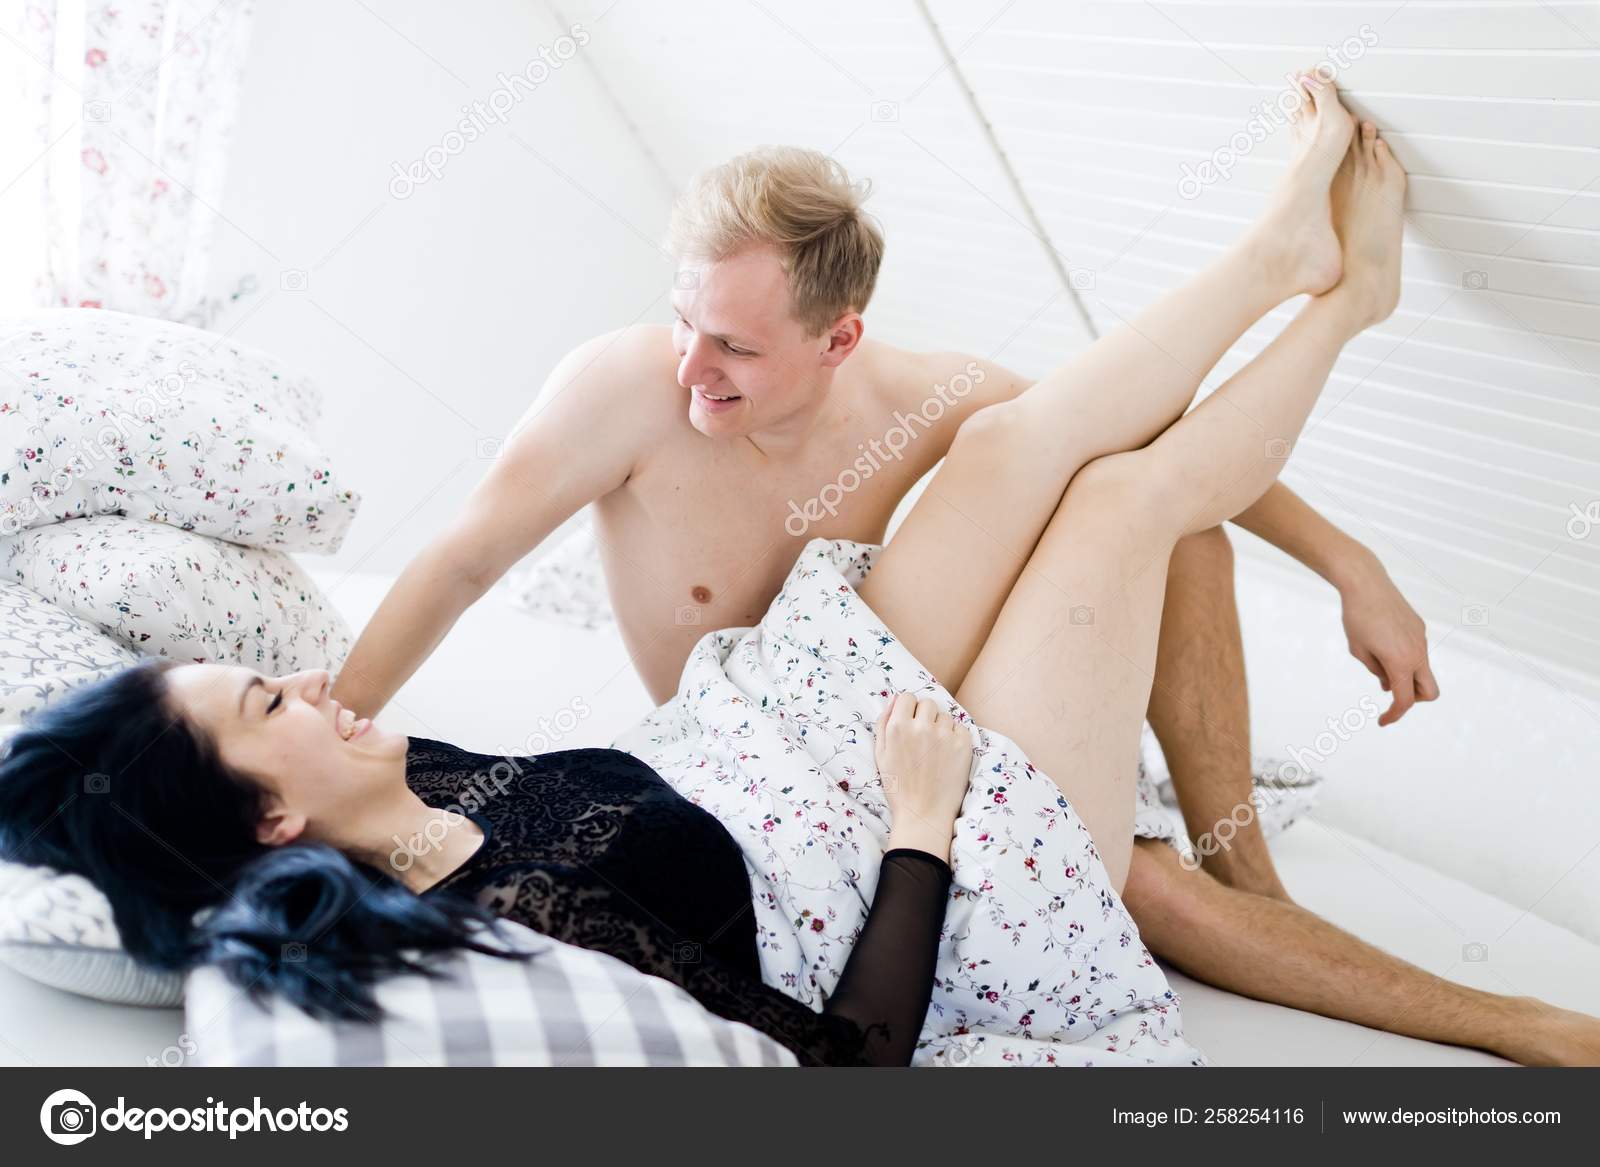 A couple after having sex in bedroom pic